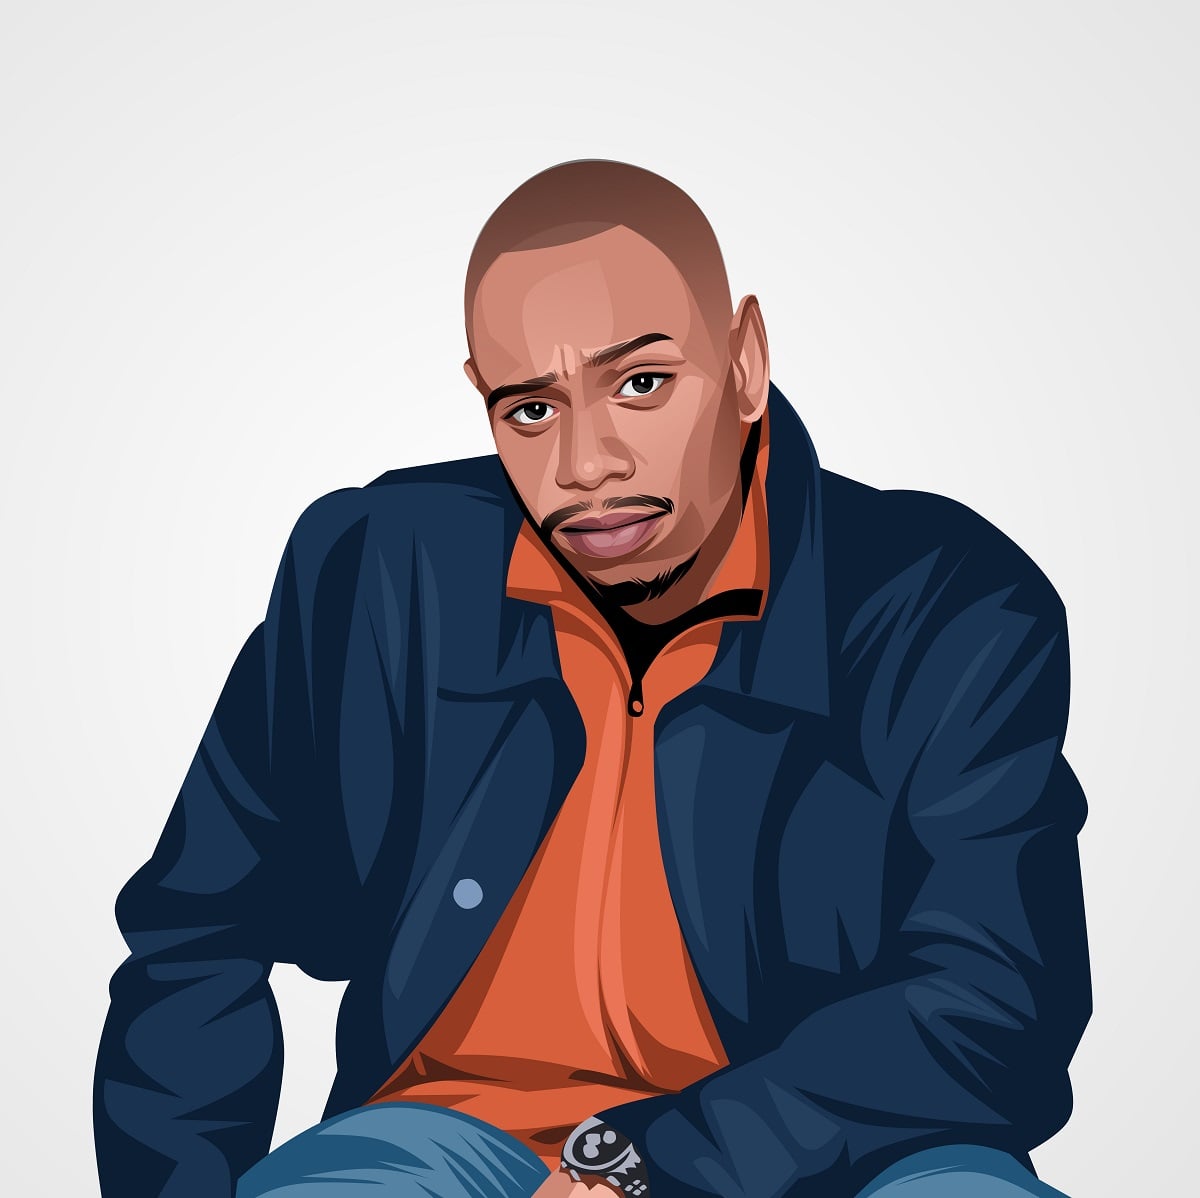 Dave Chappelle © Inspirationfeed. All rights reserved.